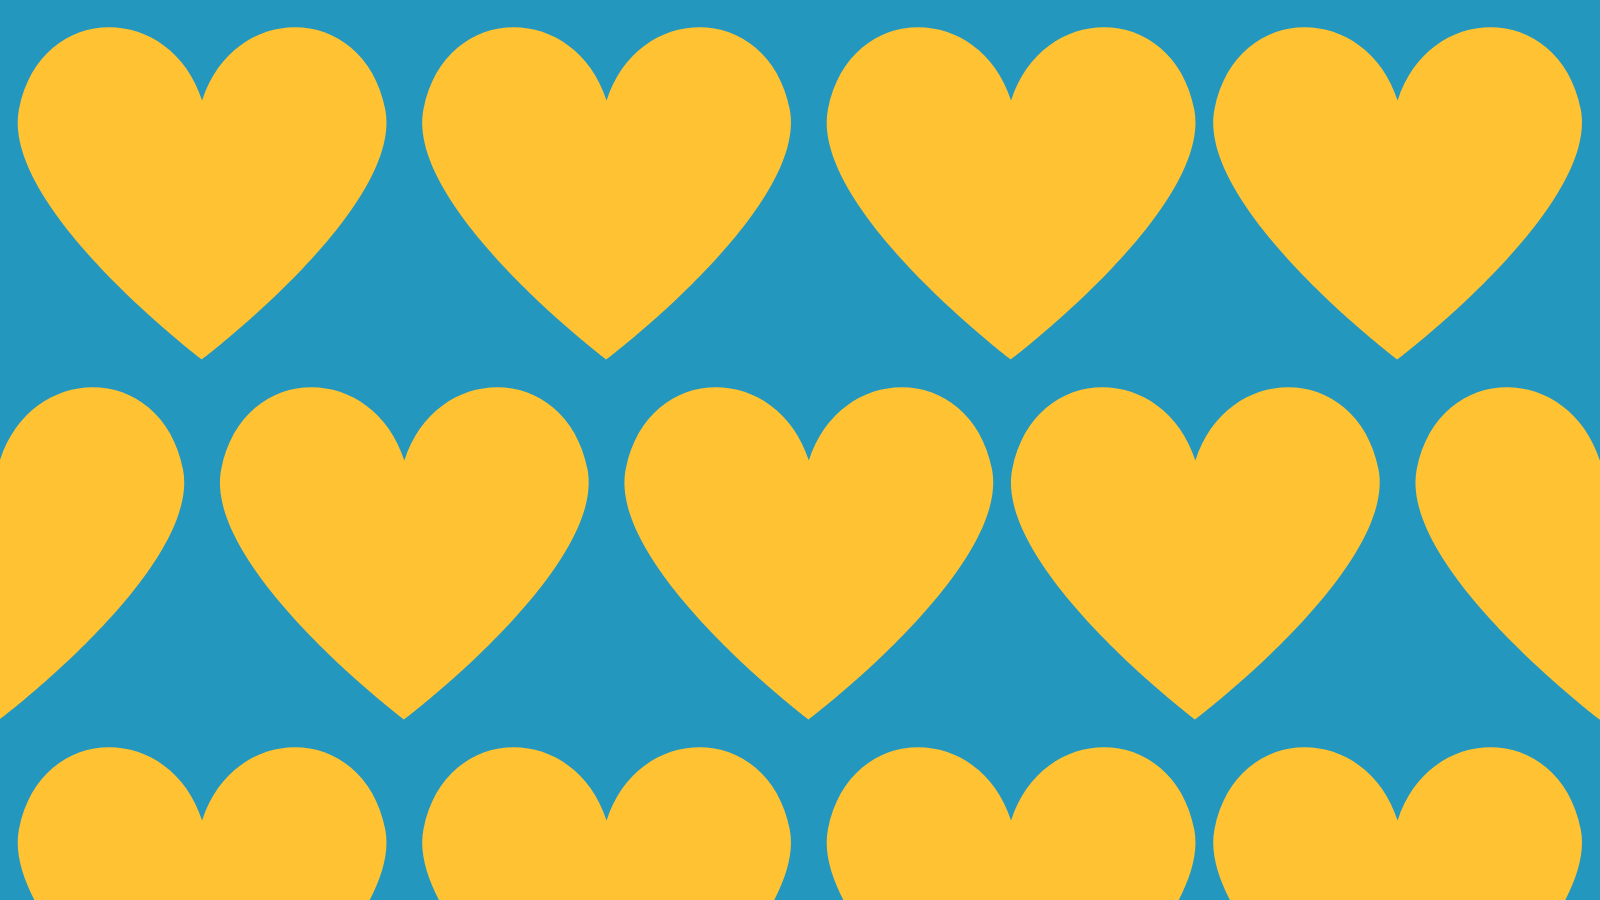 Yellow hearts on a blue background